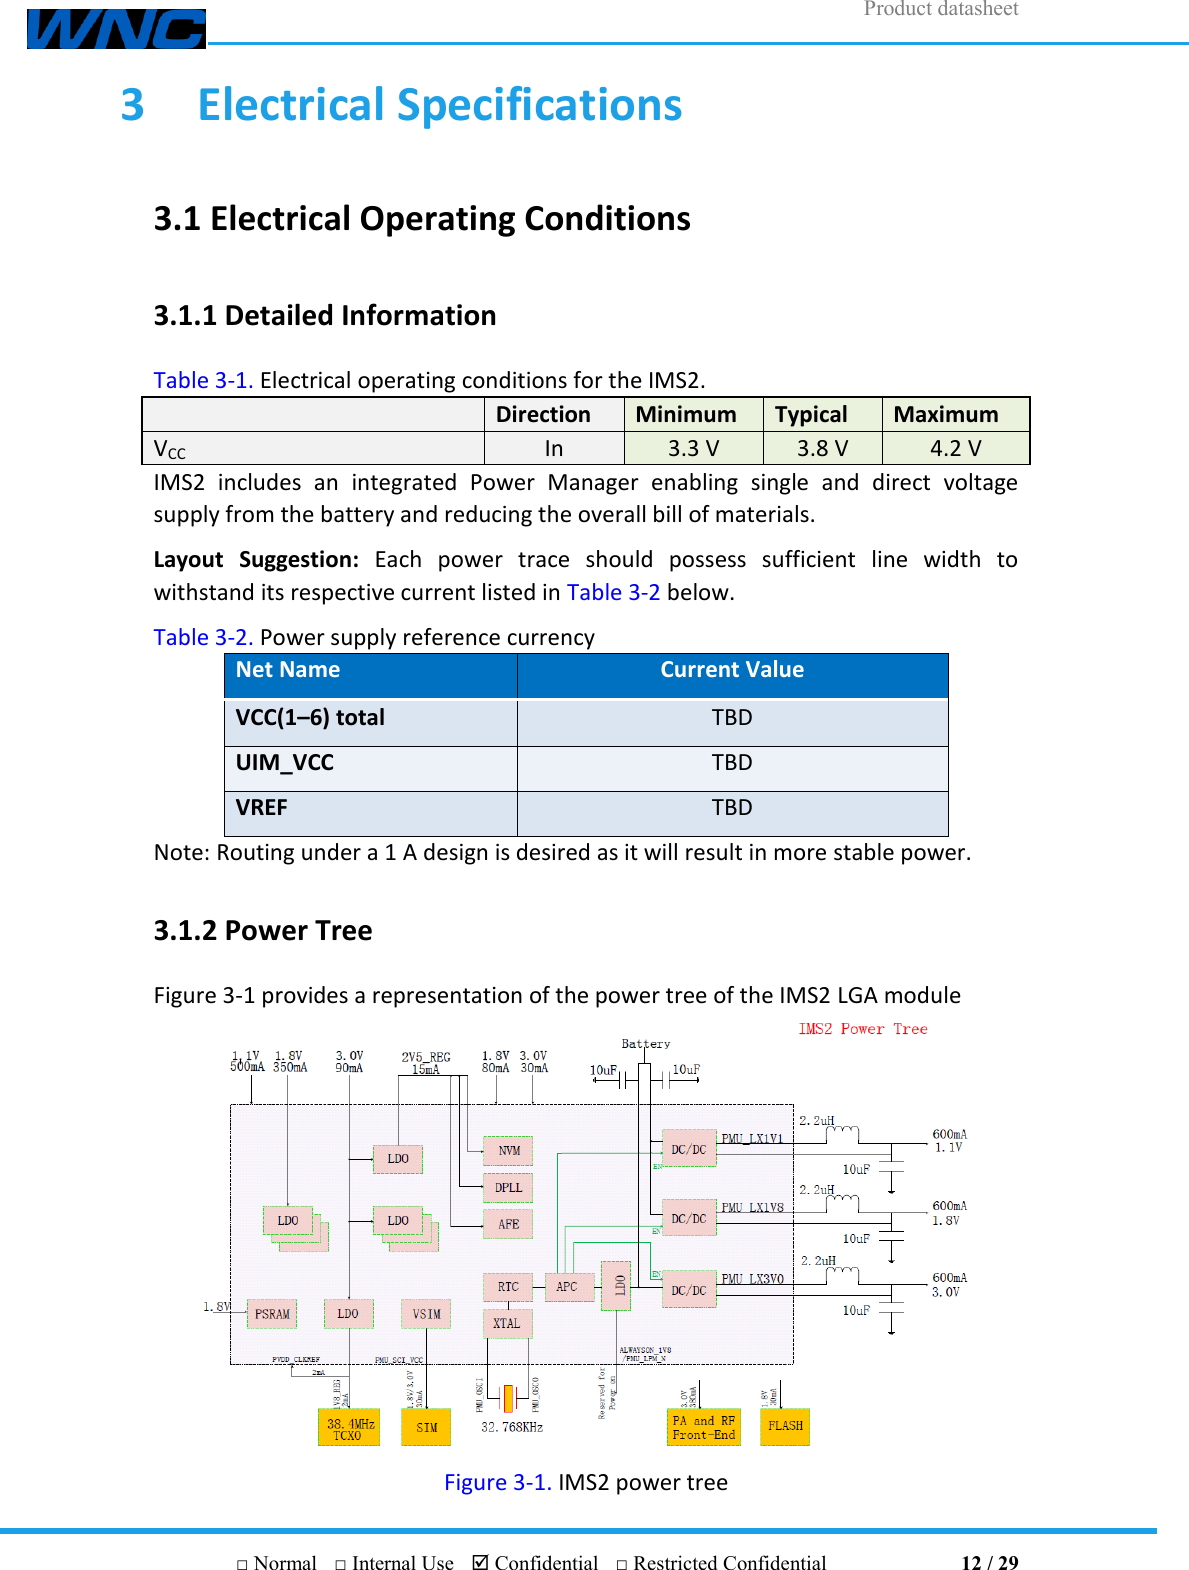 Product datasheet       □ Normal  □ Internal Use   Confidential  □ Restricted Confidential                                12 / 29 3  Electrical Specifications 3.1 Electrical Operating Conditions 3.1.1 Detailed Information Table 3-1. Electrical operating conditions for the IMS2.  Direction Minimum Typical Maximum VCC In 3.3 V 3.8 V 4.2 V IMS2  includes  an  integrated  Power  Manager  enabling  single  and  direct  voltage supply from the battery and reducing the overall bill of materials. Layout  Suggestion:  Each  power  trace  should  possess  sufficient  line  width  to withstand its respective current listed in Table 3-2 below. Table 3-2. Power supply reference currency Net Name Current Value VCC(1–6) total TBD UIM_VCC TBD VREF TBD Note: Routing under a 1 A design is desired as it will result in more stable power. 3.1.2 Power Tree Figure 3-1 provides a representation of the power tree of the IMS2 LGA module  Figure 3-1. IMS2 power tree 